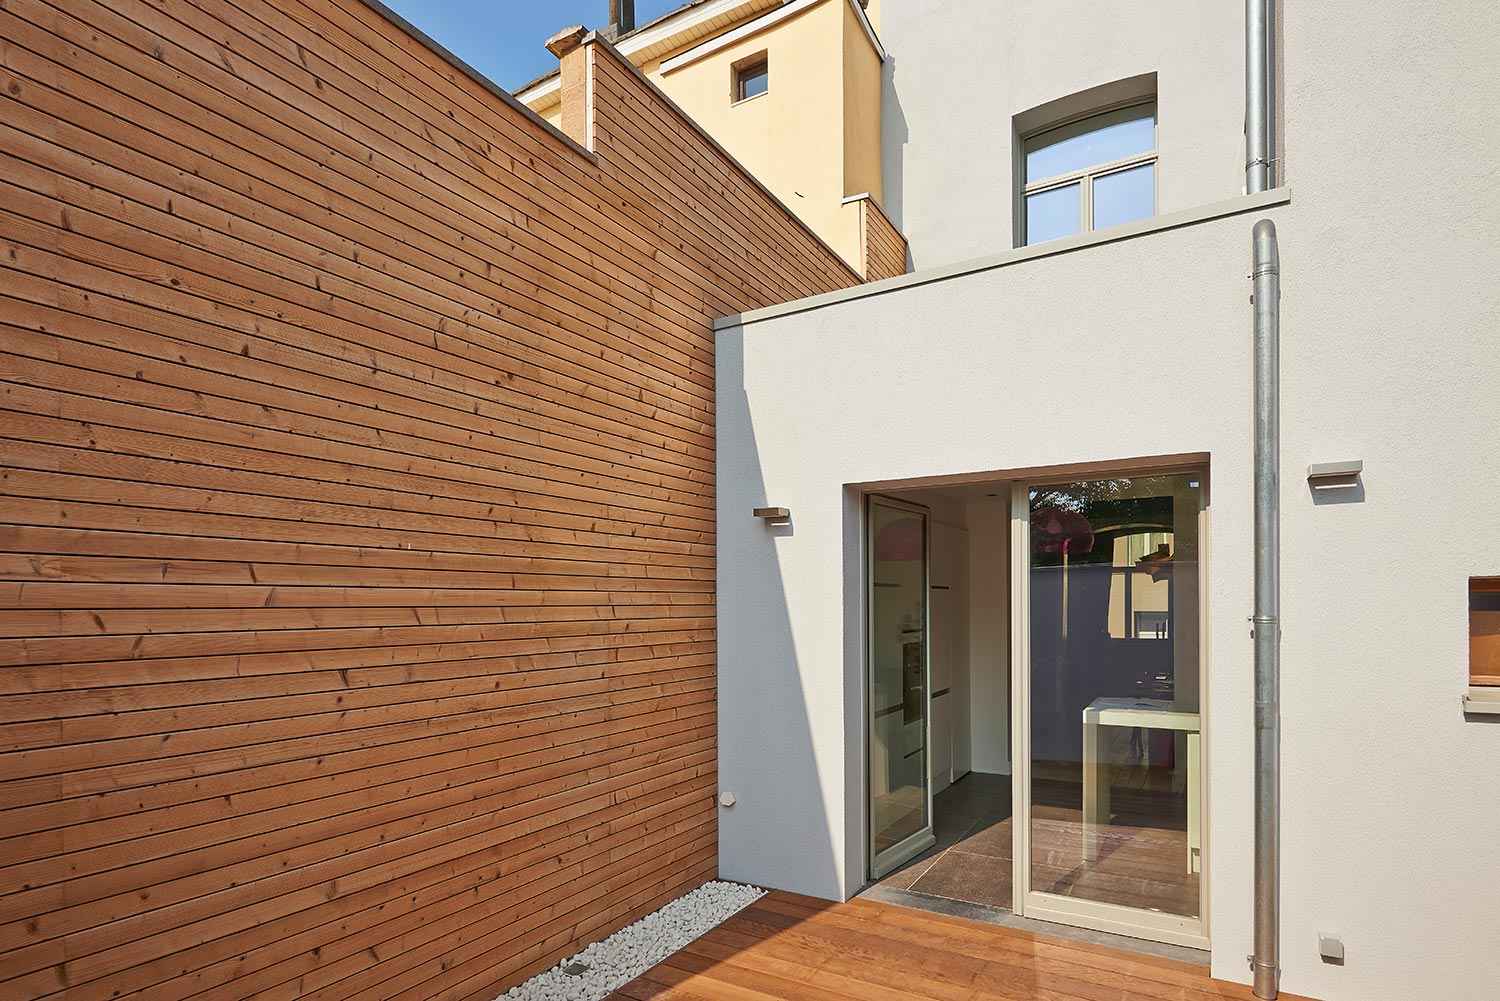 Wall construction with insulating wood cladding in countryard